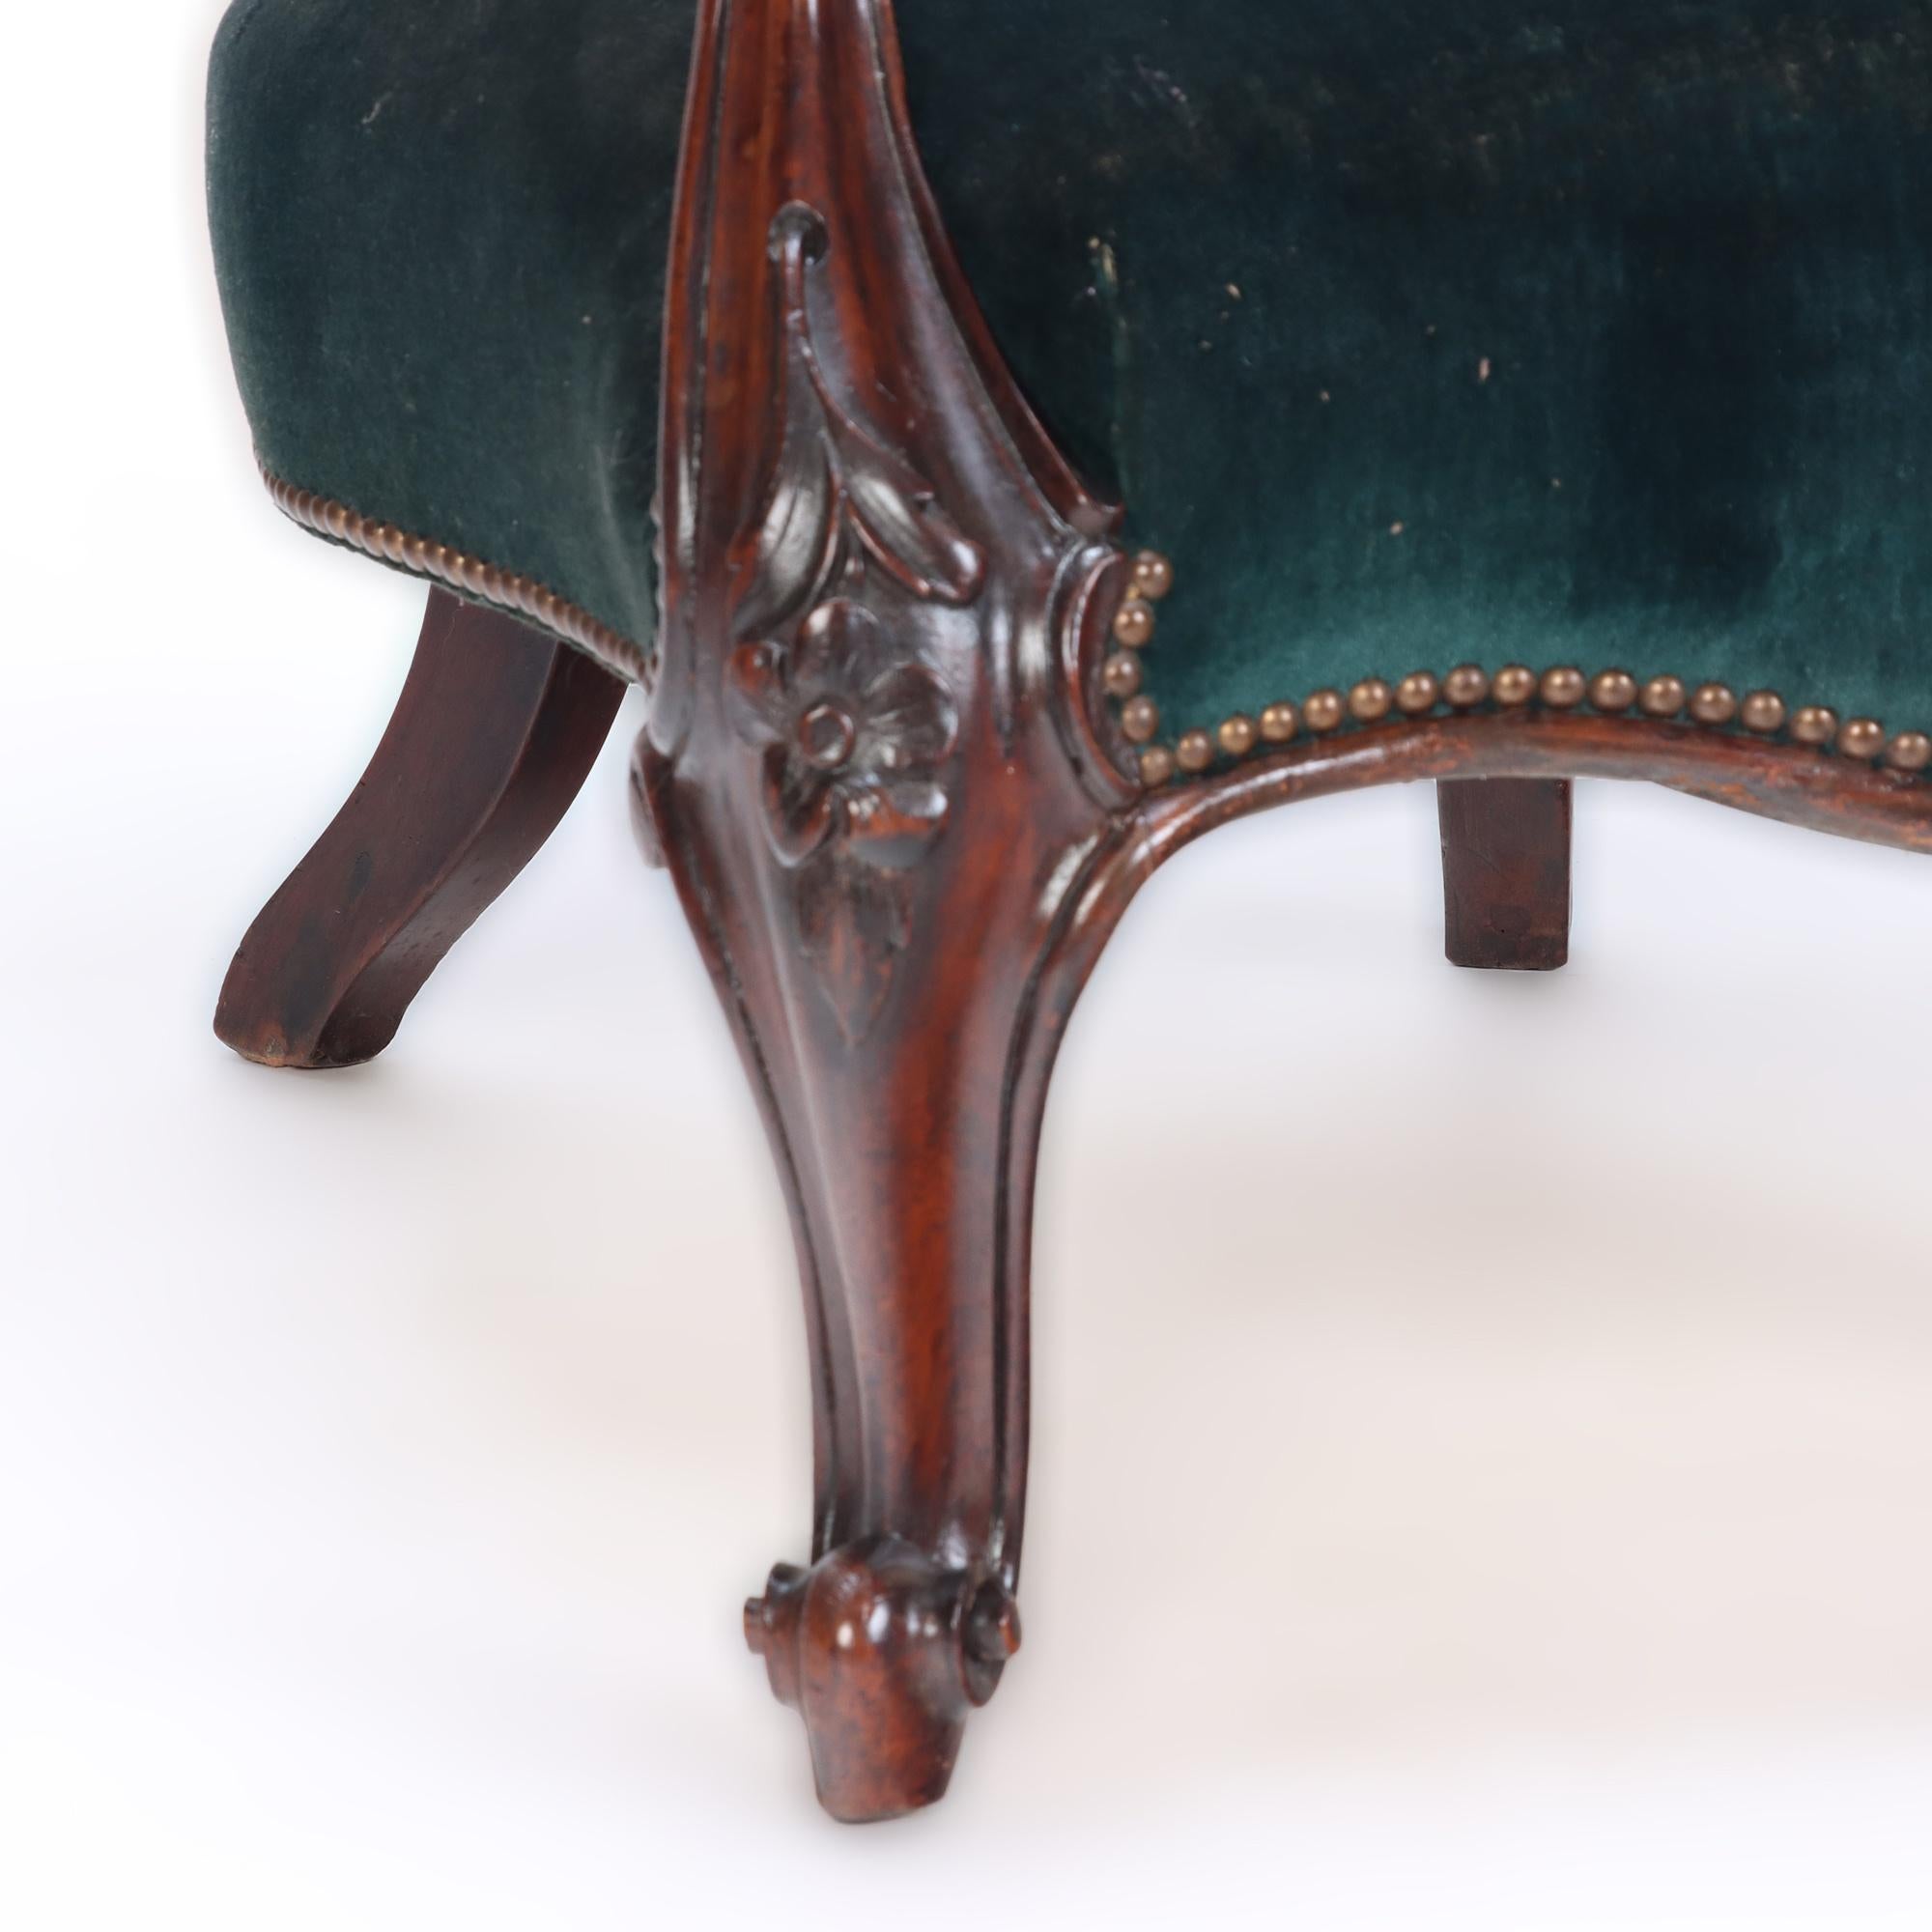 Imposing Velvet Upholstered Library Armchair with Continuous Arm, 19th C. For Sale 1